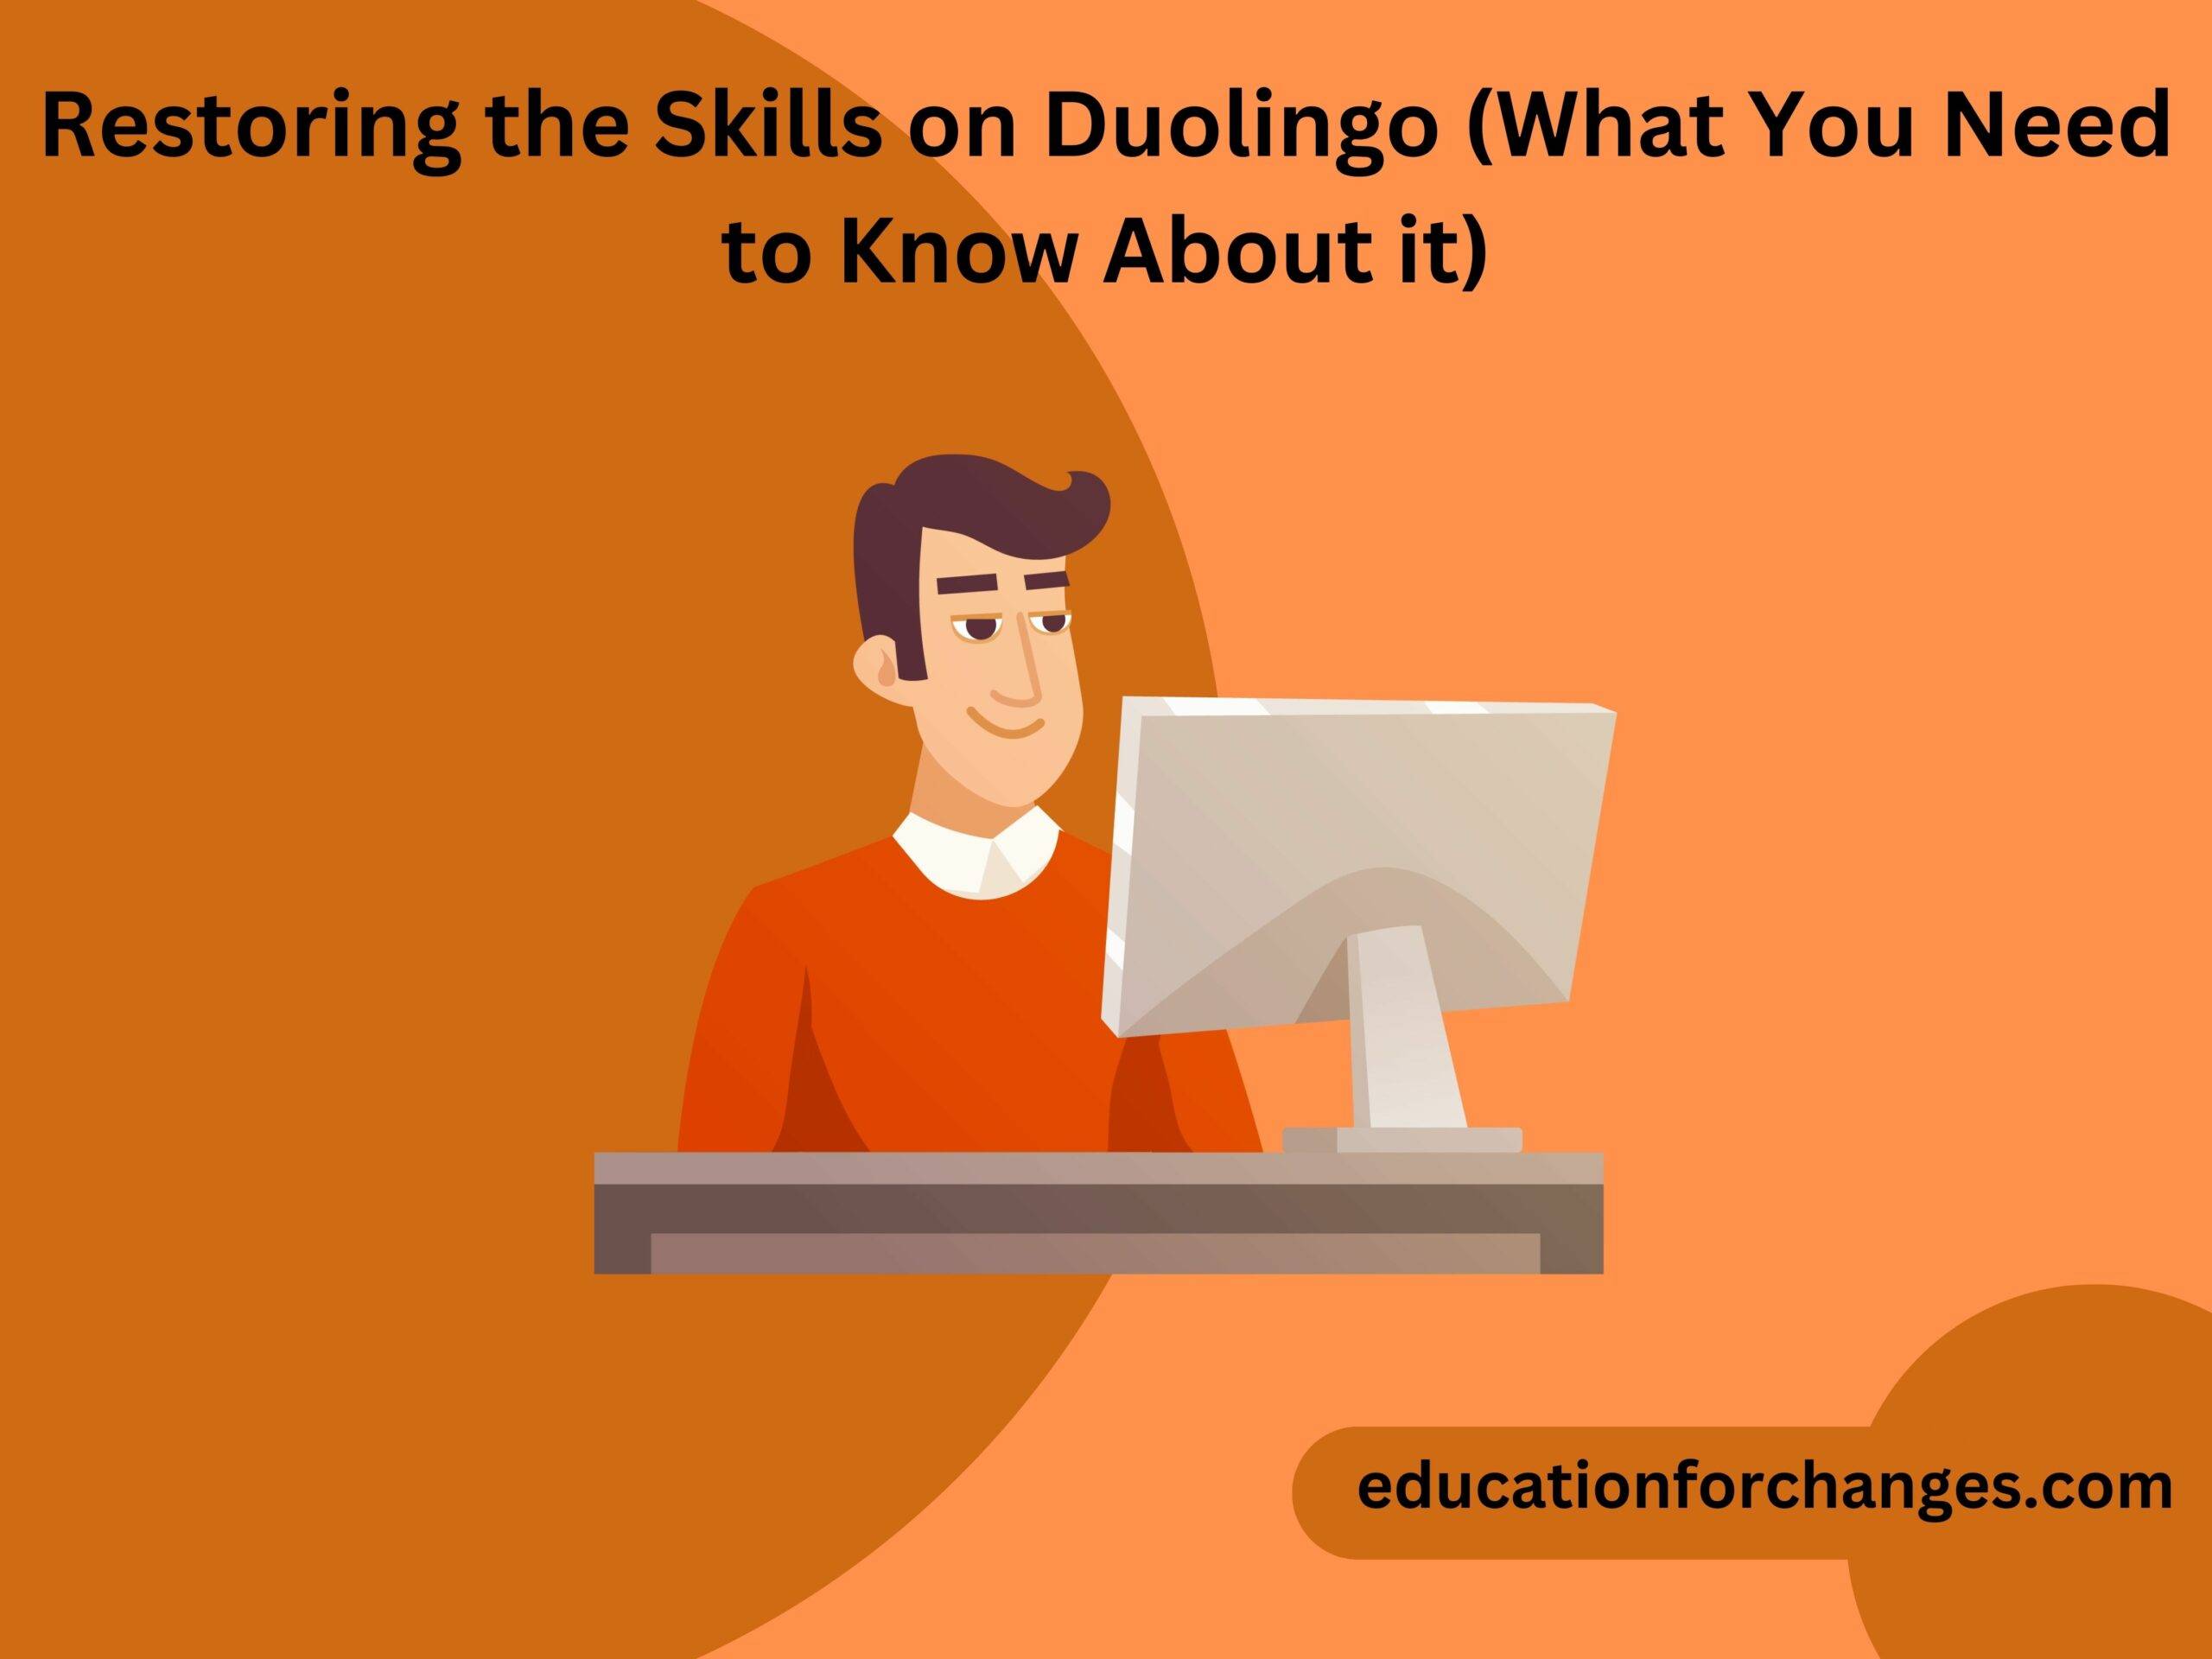 Restoring the Skills on Duolingo (What You Need to Know About it)